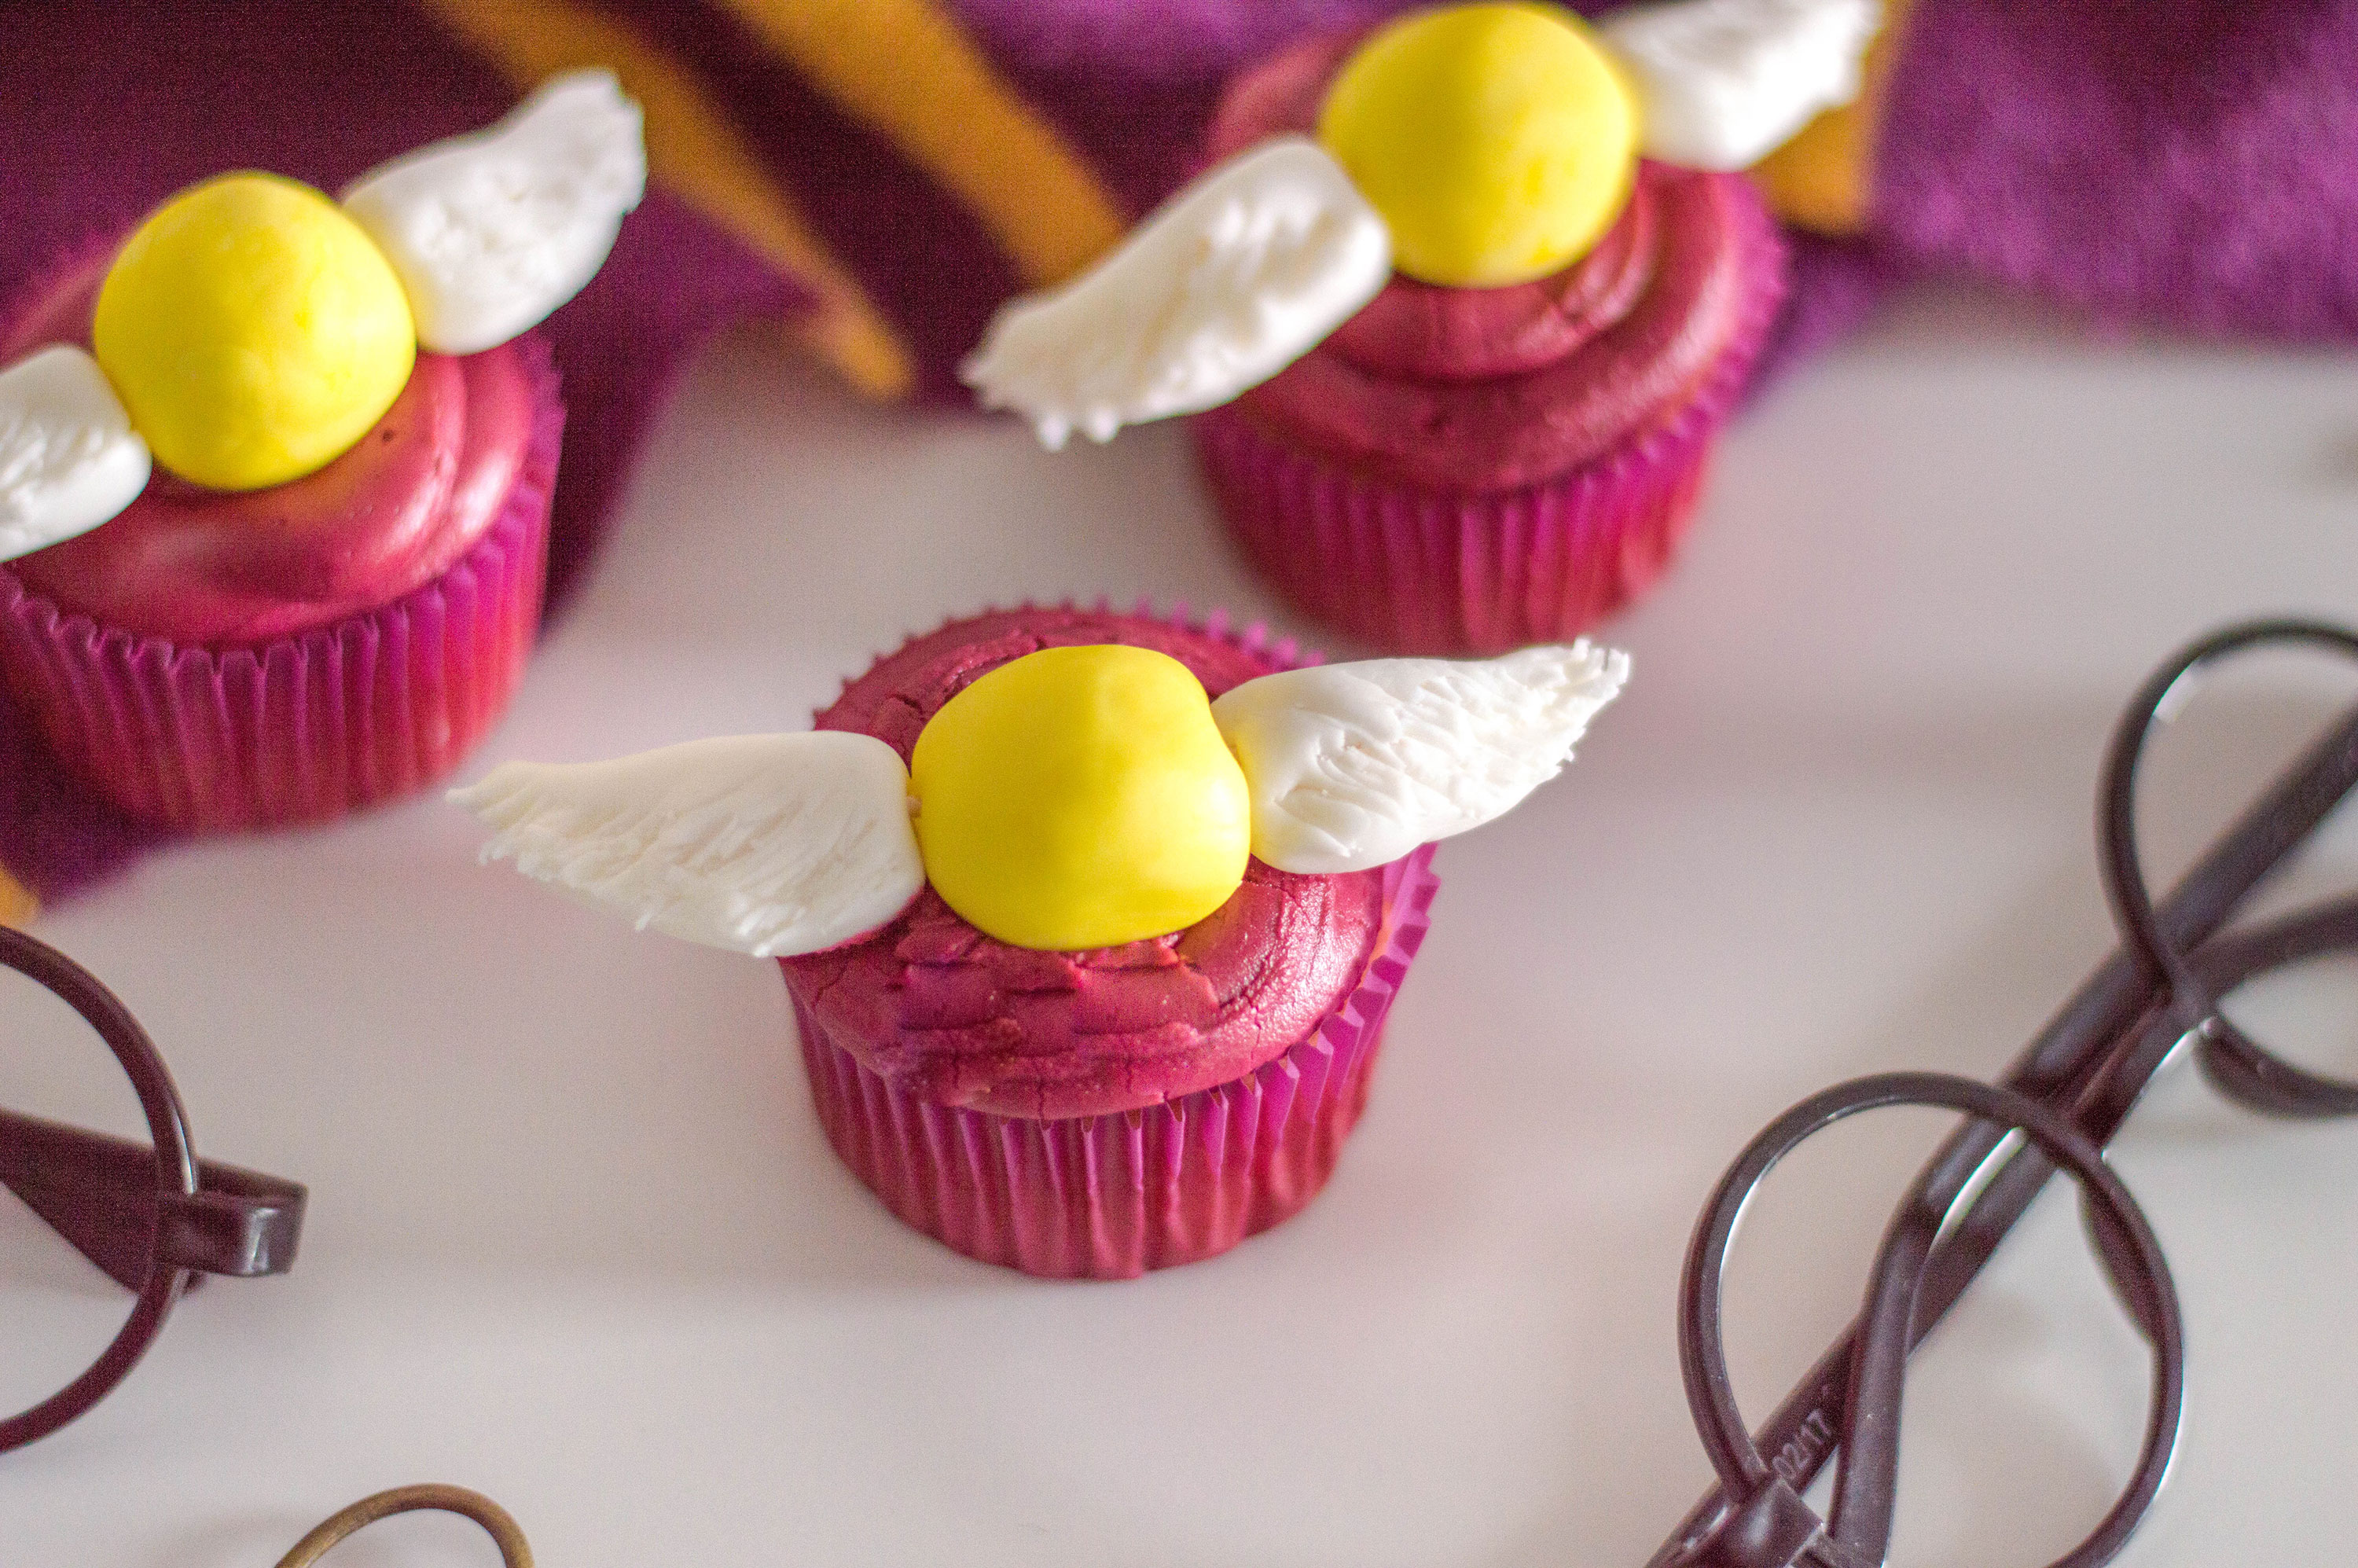 Feeling magical? These Golden Snitch Cupcakes are inspired by our favorite wizard and we can't wait to feast on them!